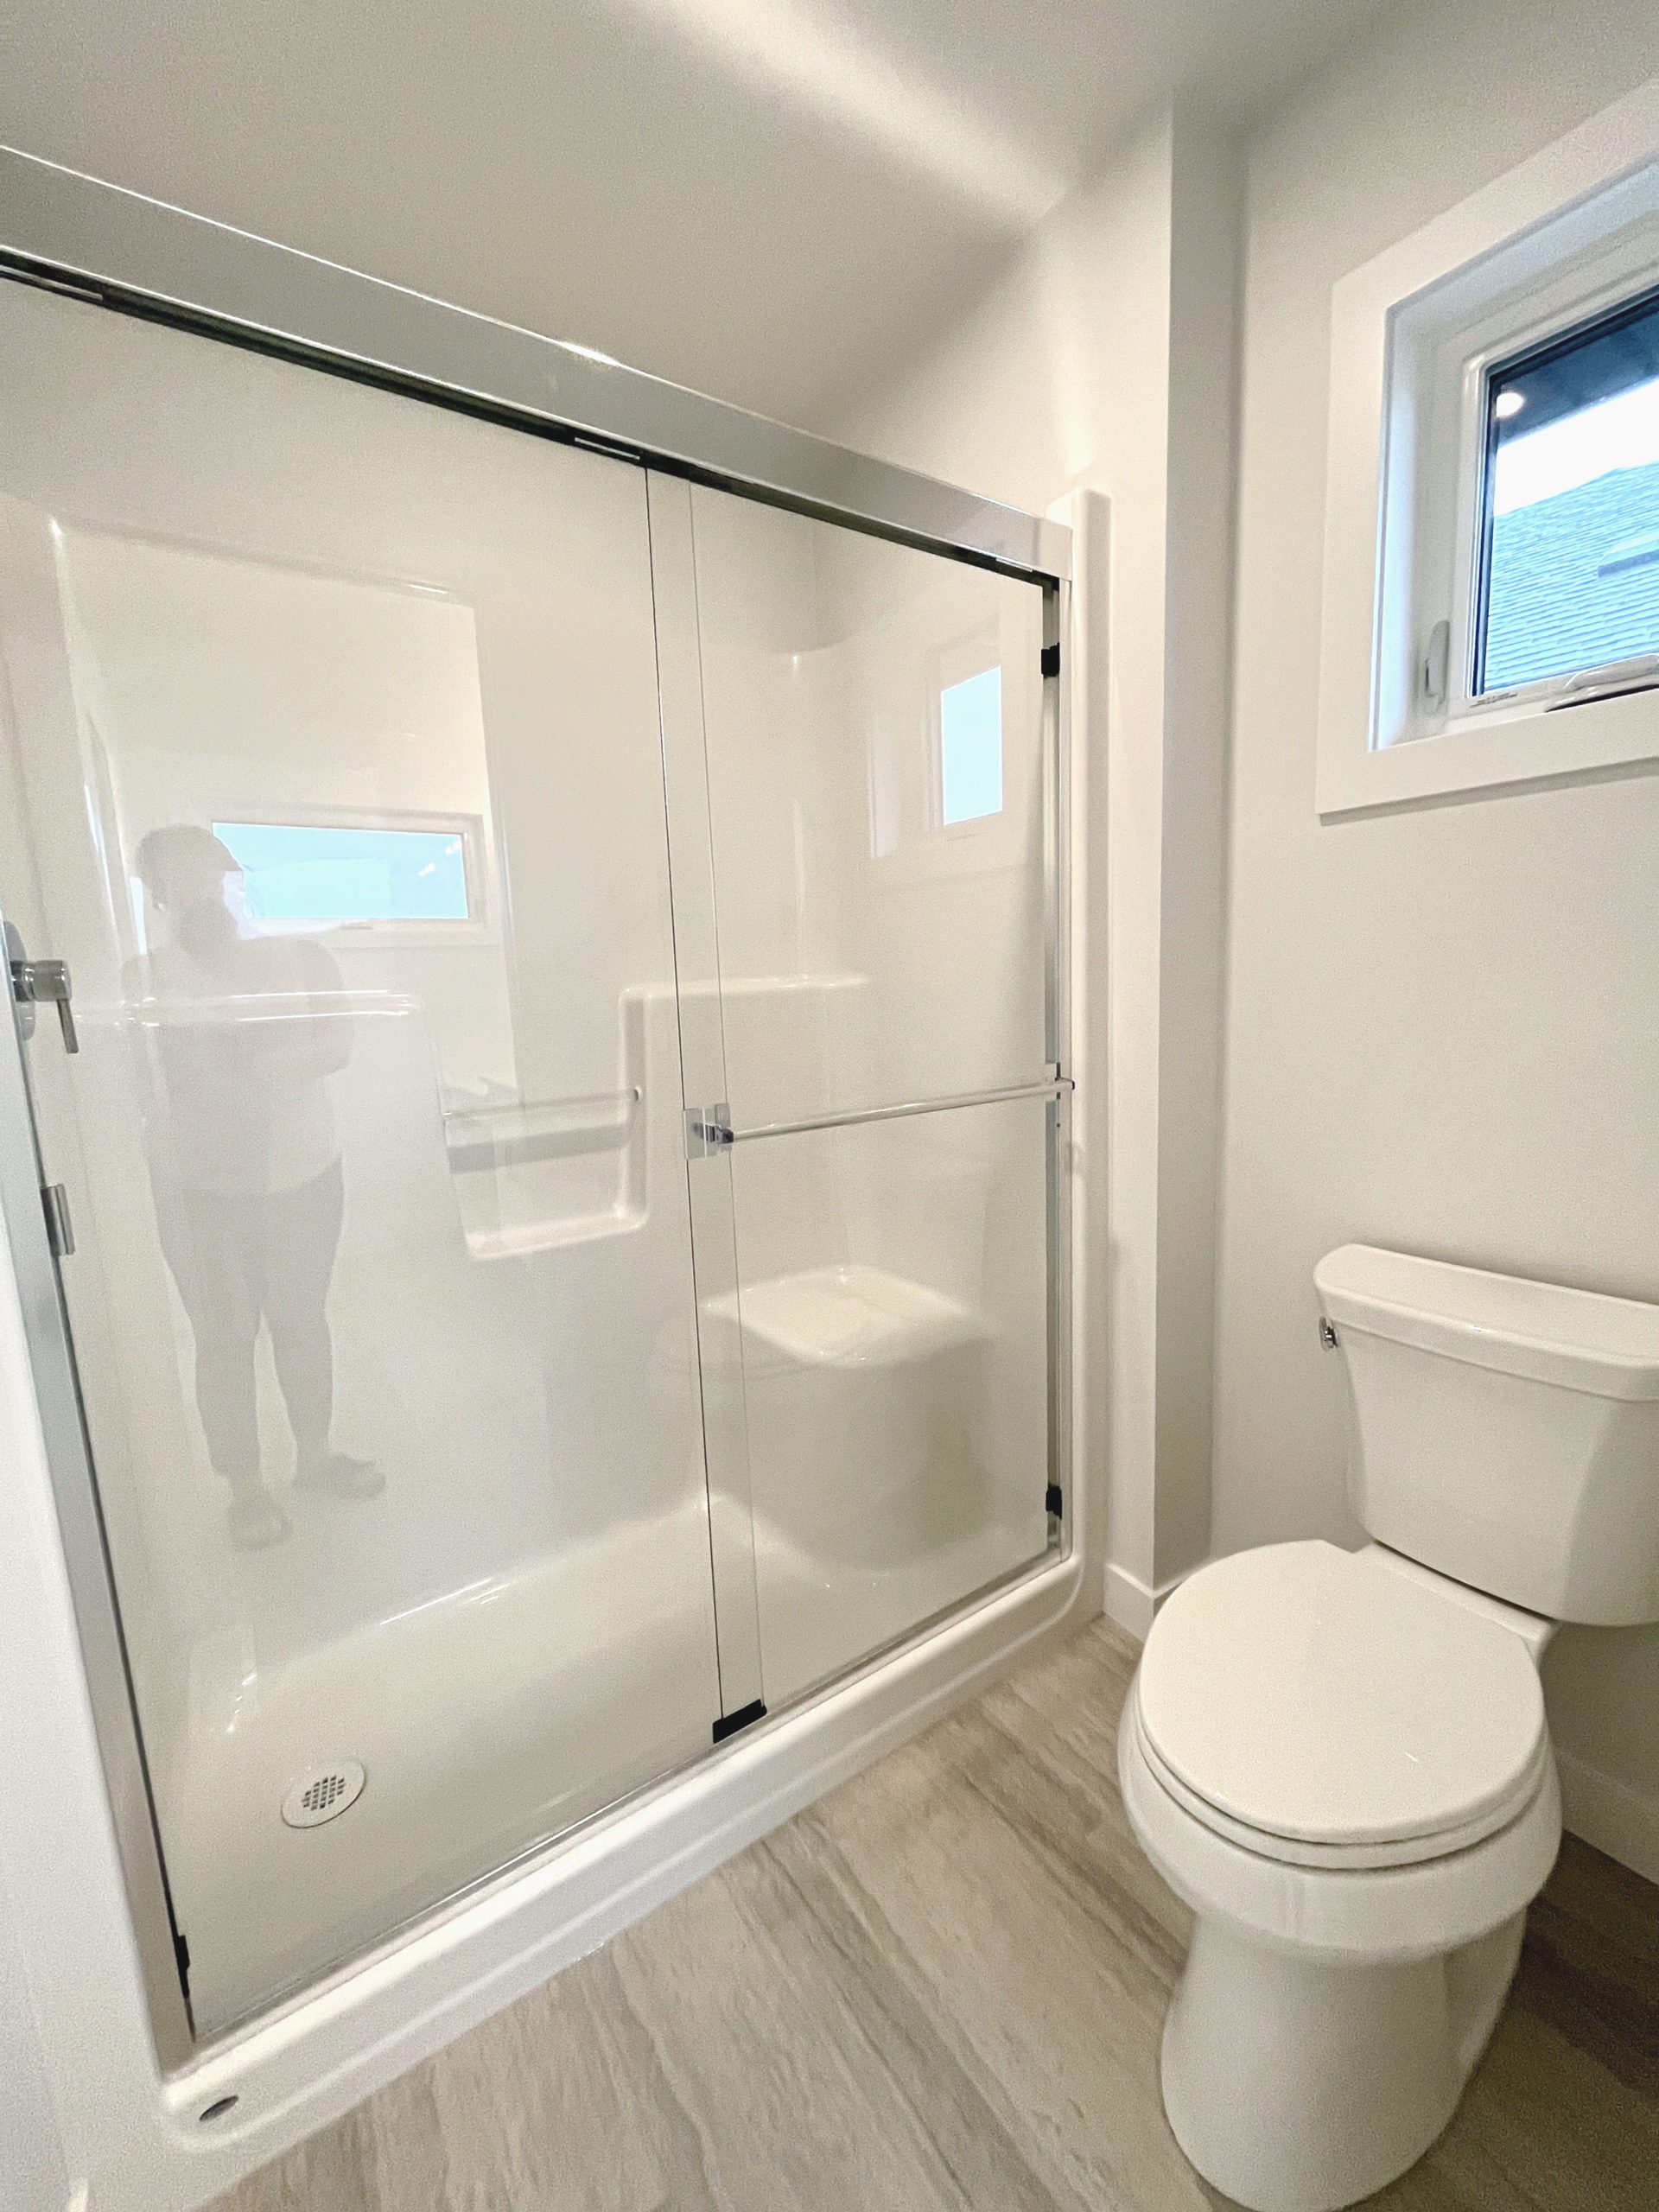 Primary water closet with white toilet sitting next to a walk in shower.